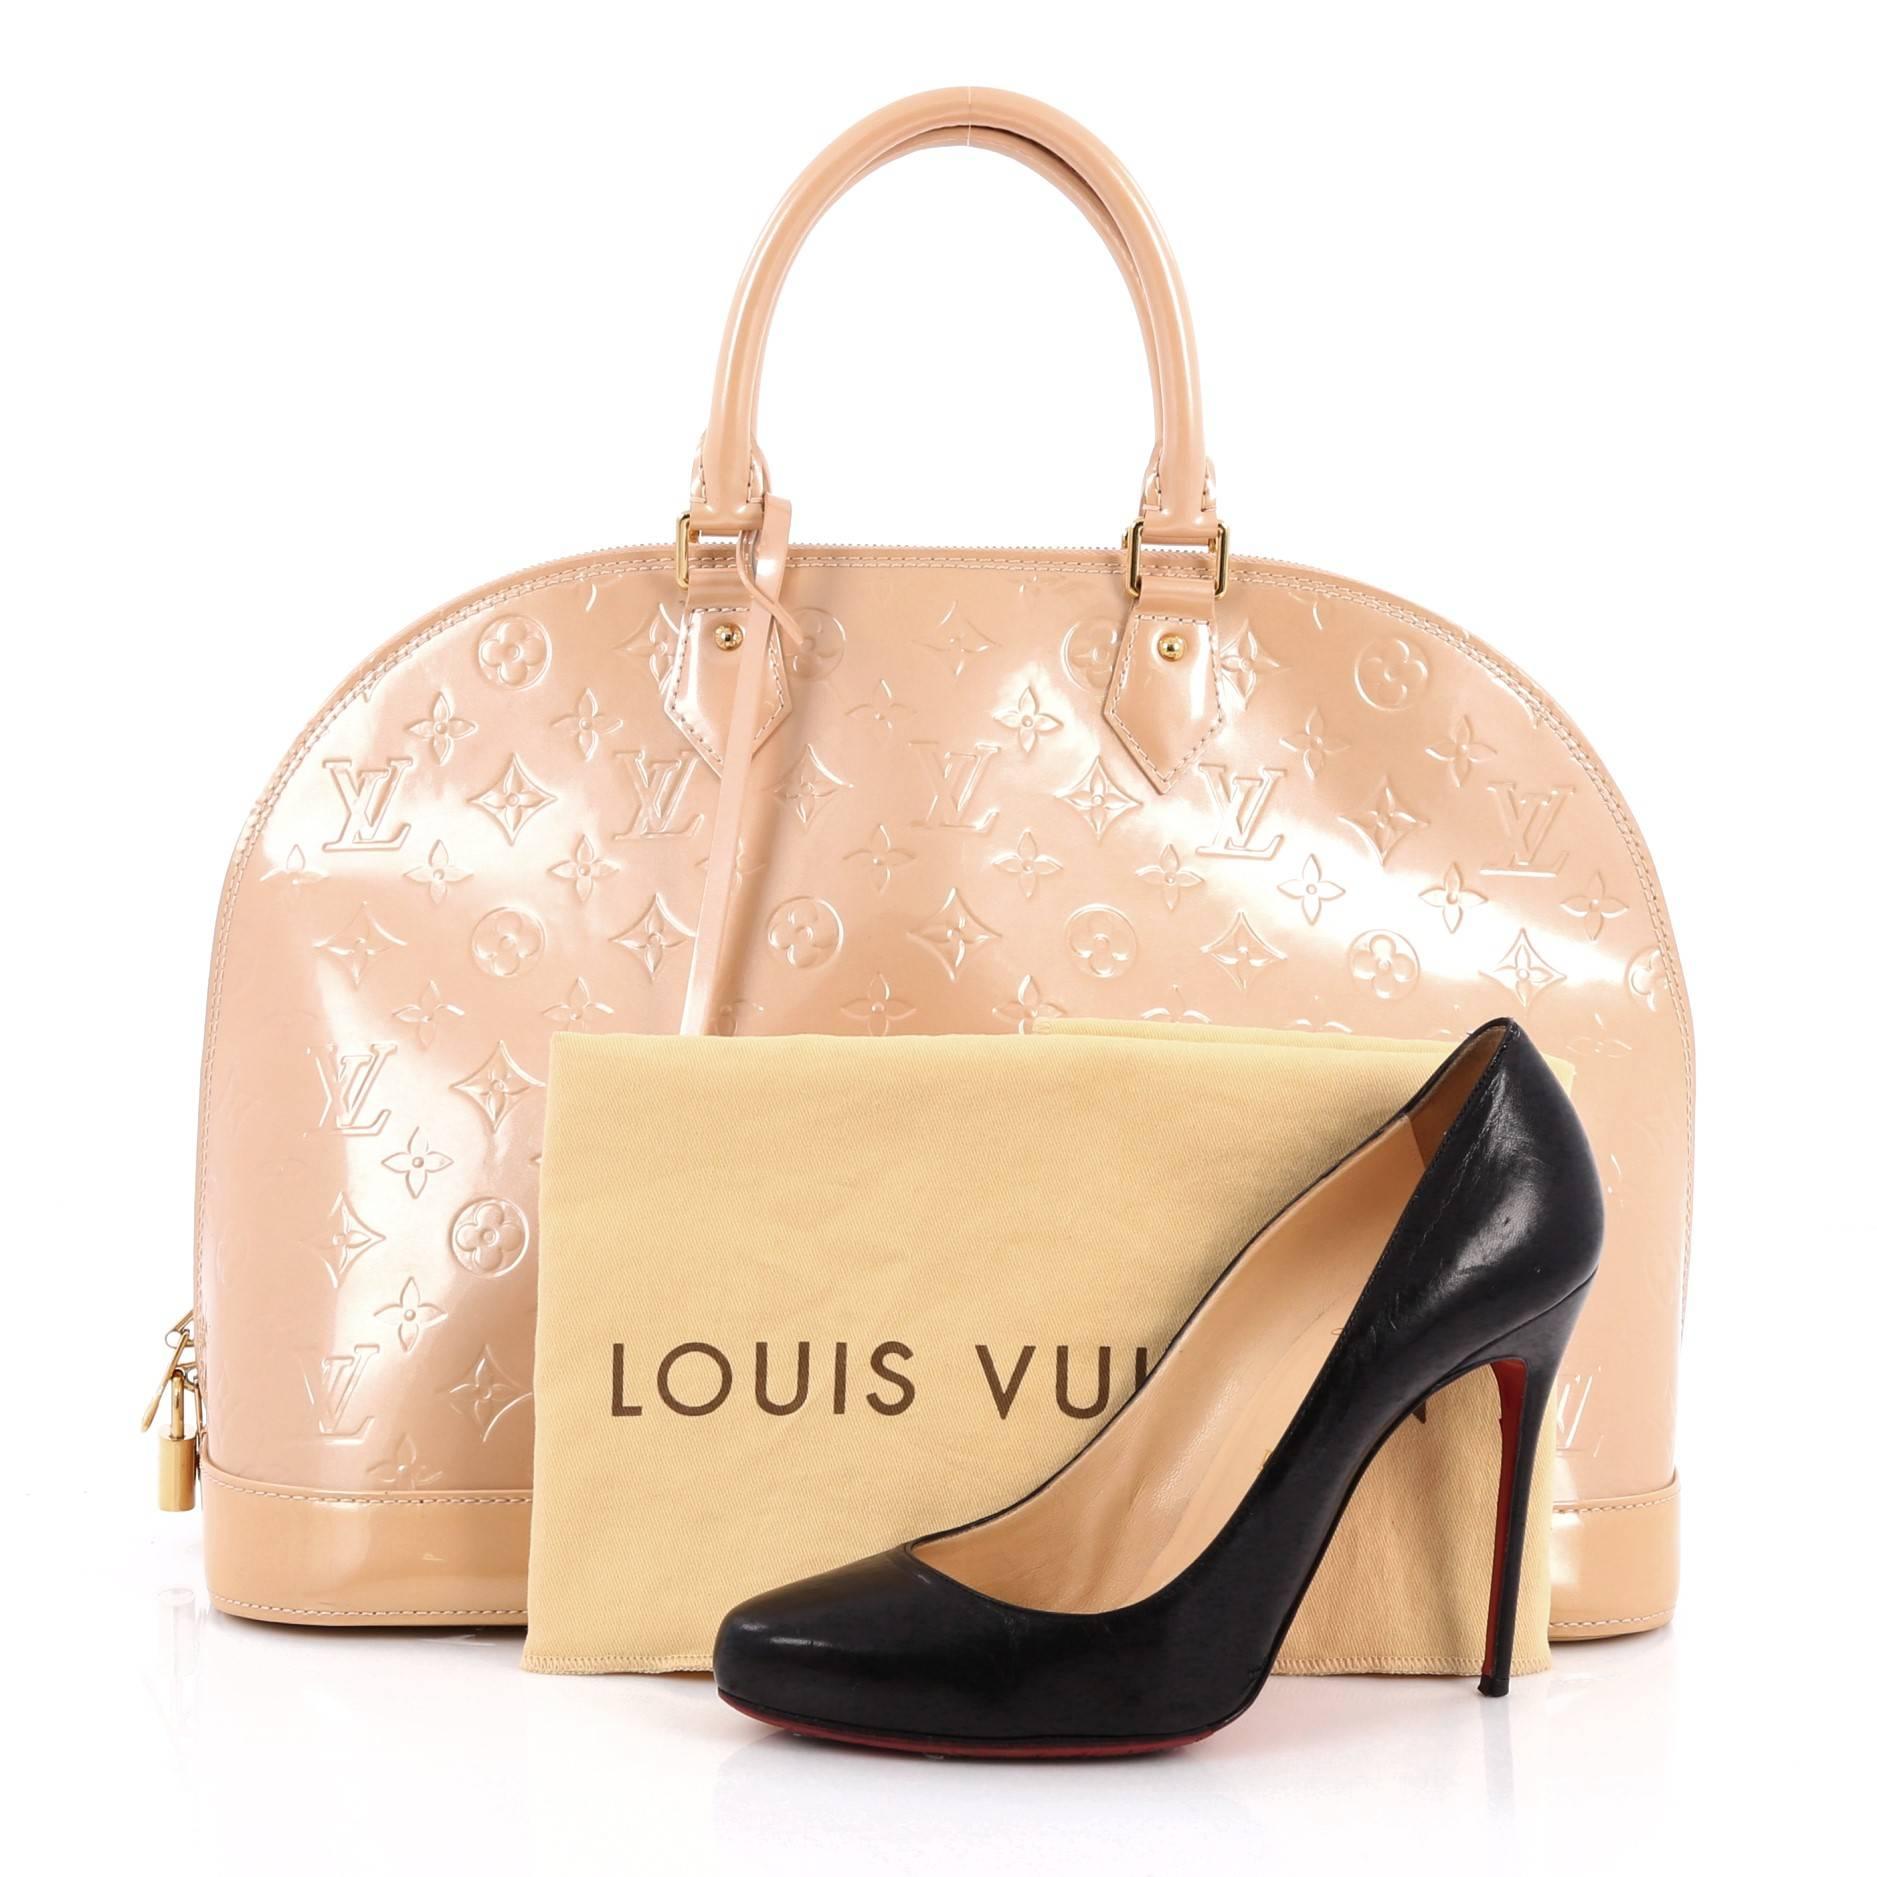 This authentic Louis Vuitton Alma Handbag Monogram Vernis GM is a fresh and elegant spin on a classic style that is perfect for all seasons. Crafted from Louis Vuitton's beige monogram vernis leather, this dome-shaped satchel features dual-rolled